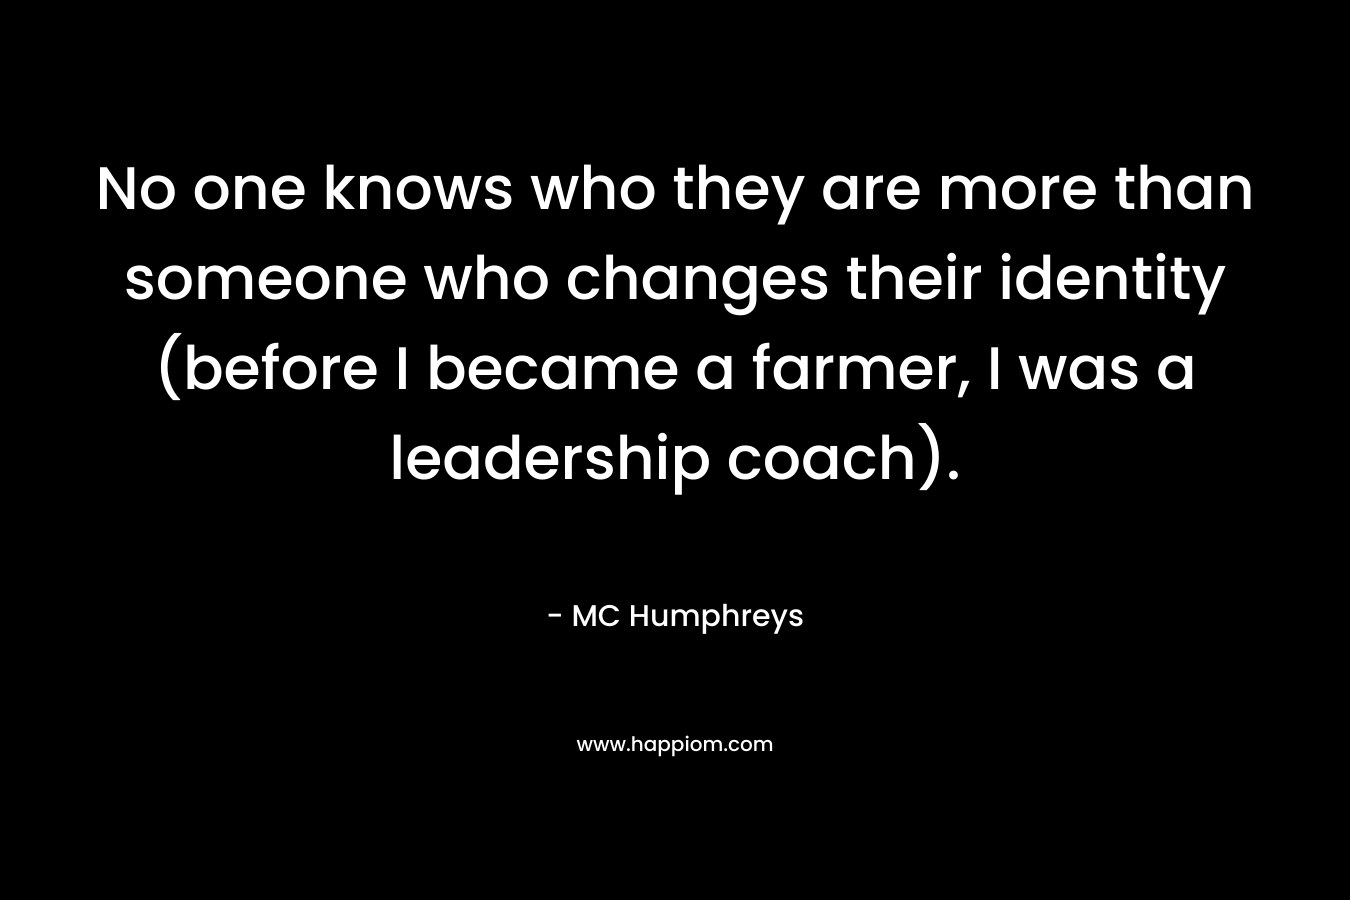 No one knows who they are more than someone who changes their identity (before I became a farmer, I was a leadership coach).